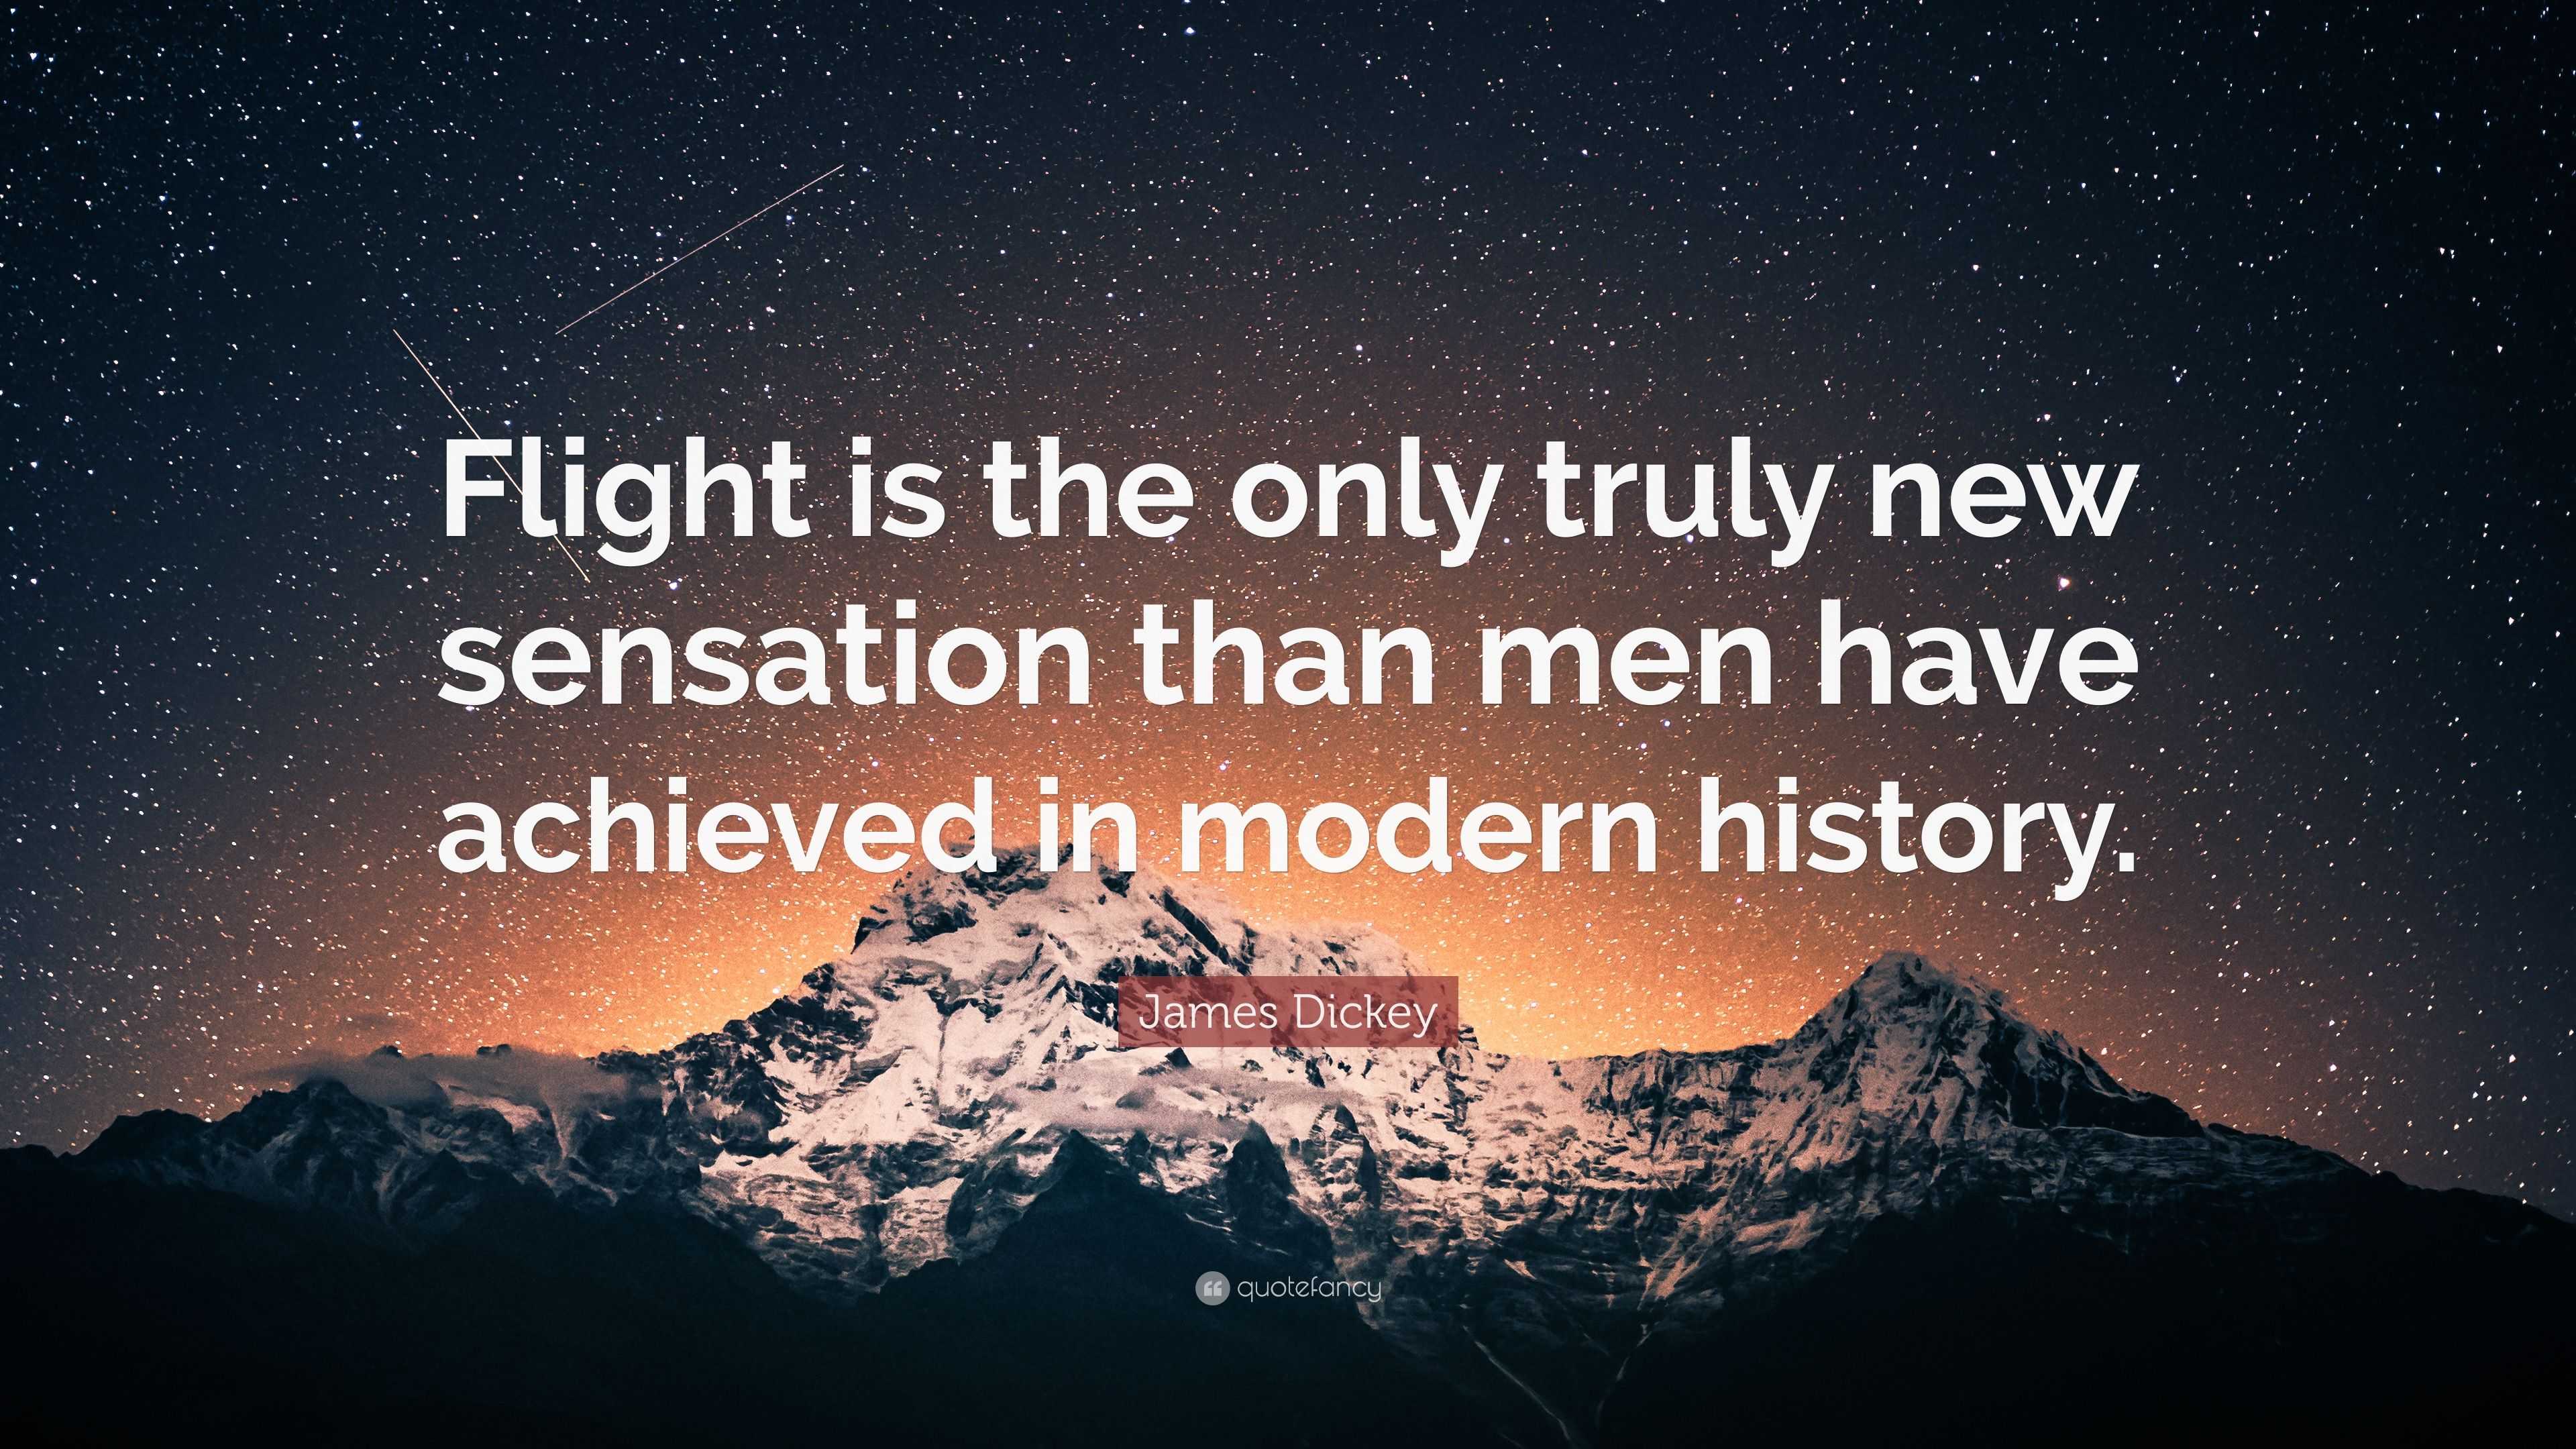 James Dickey Quote: “Flight is the only truly new sensation than men have  achieved in modern